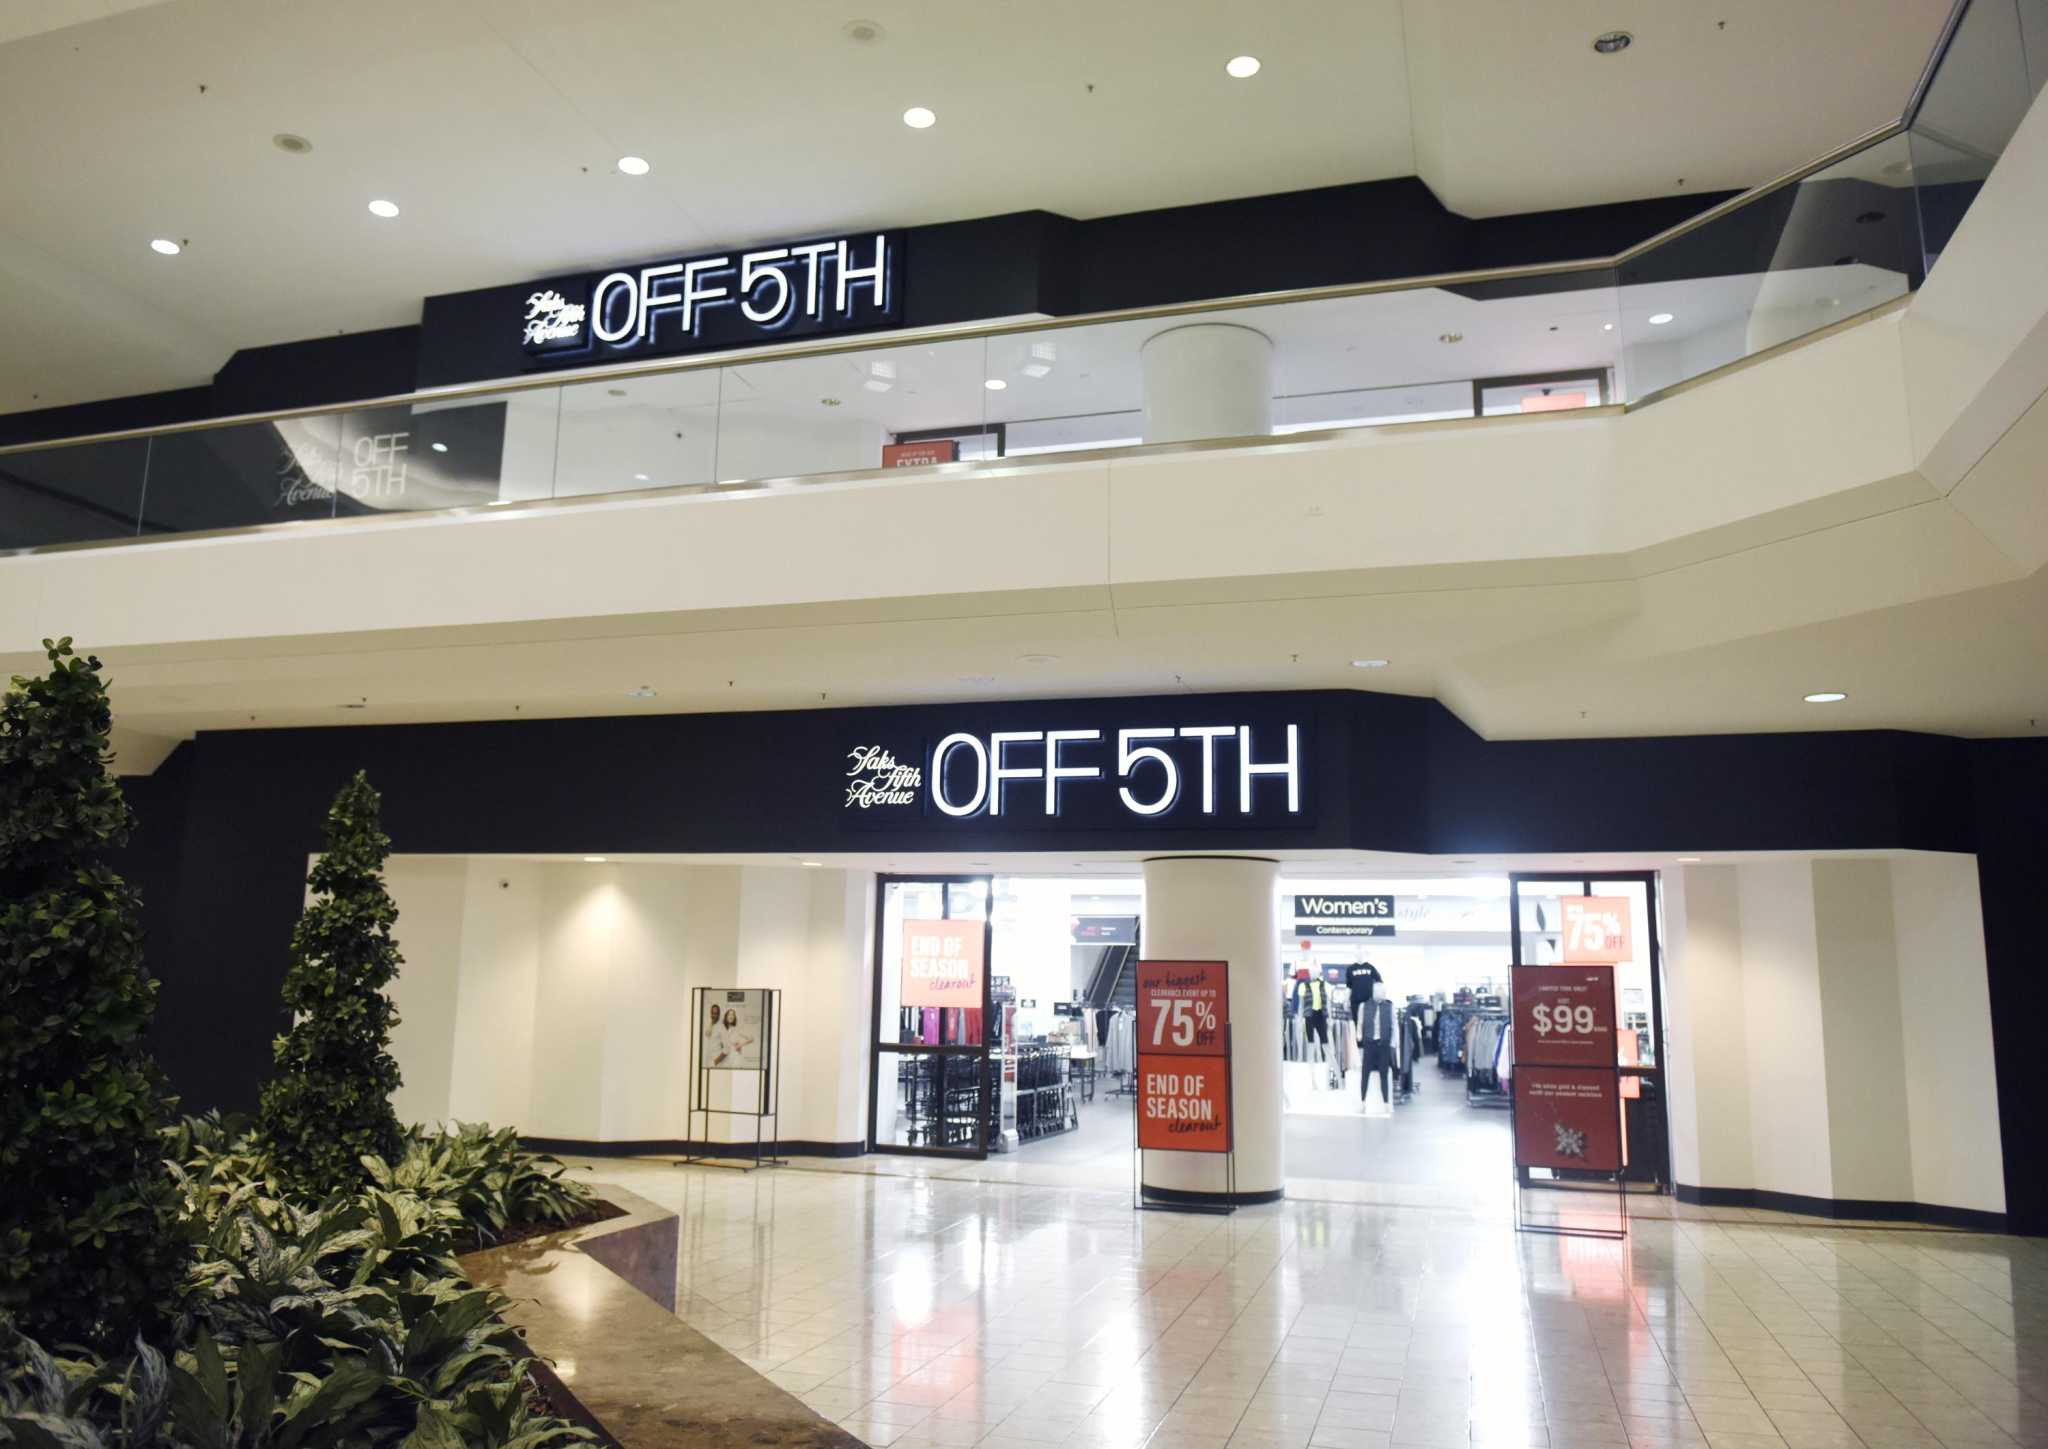 Saks Off 5th, now at Premium Outlets, opens Feb. 11